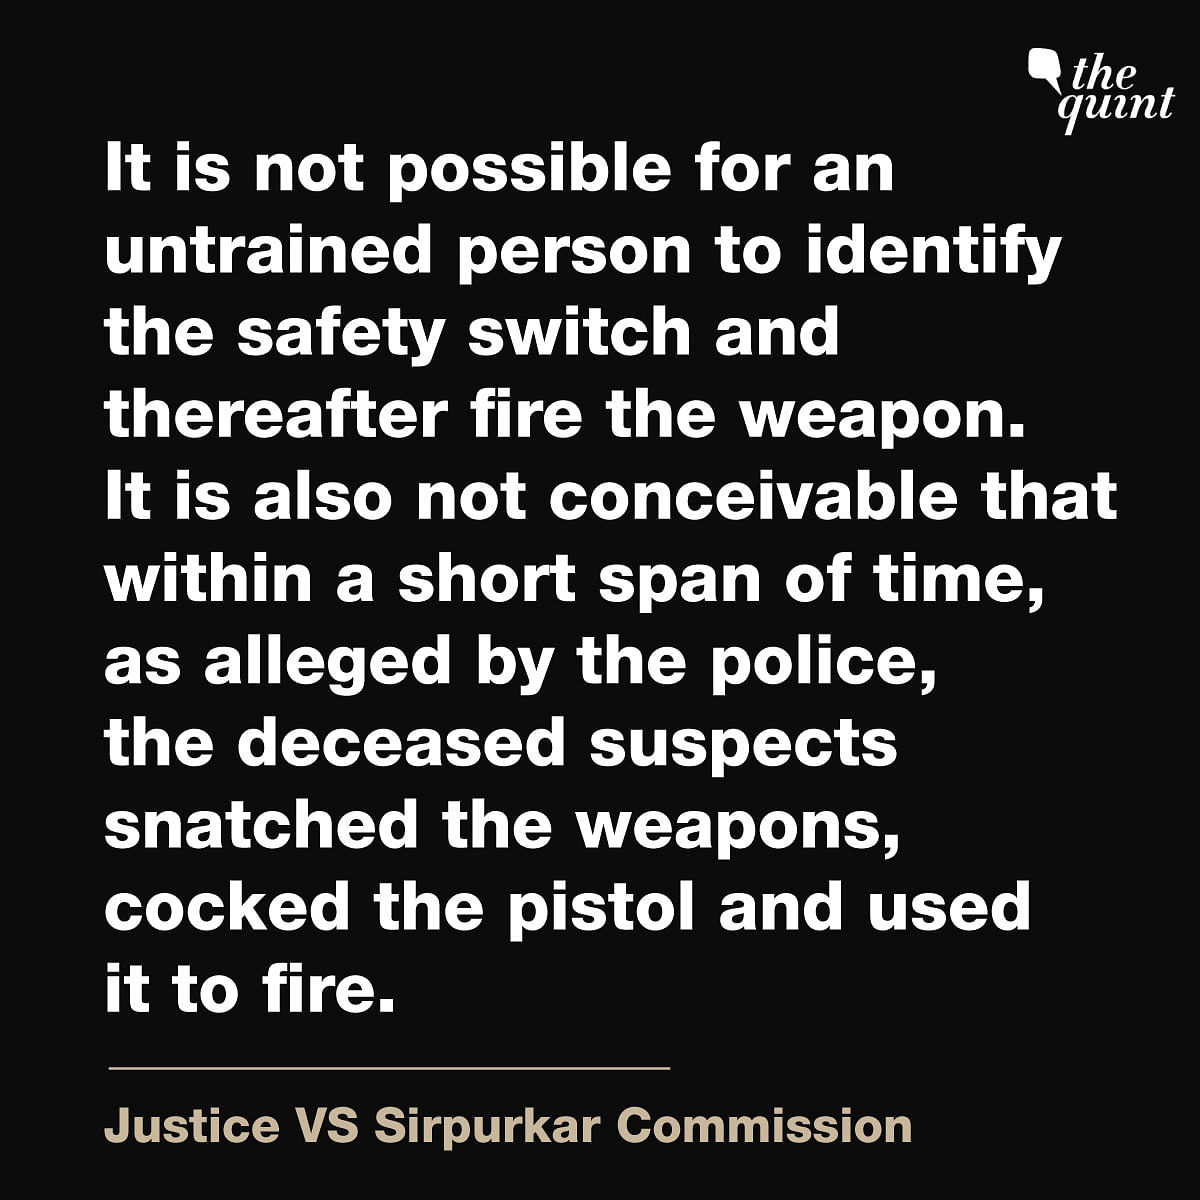 Justice VS Sirpurkar Commission has detailed out the loopholes in Hyderabad police's 'unbelievable' claims.